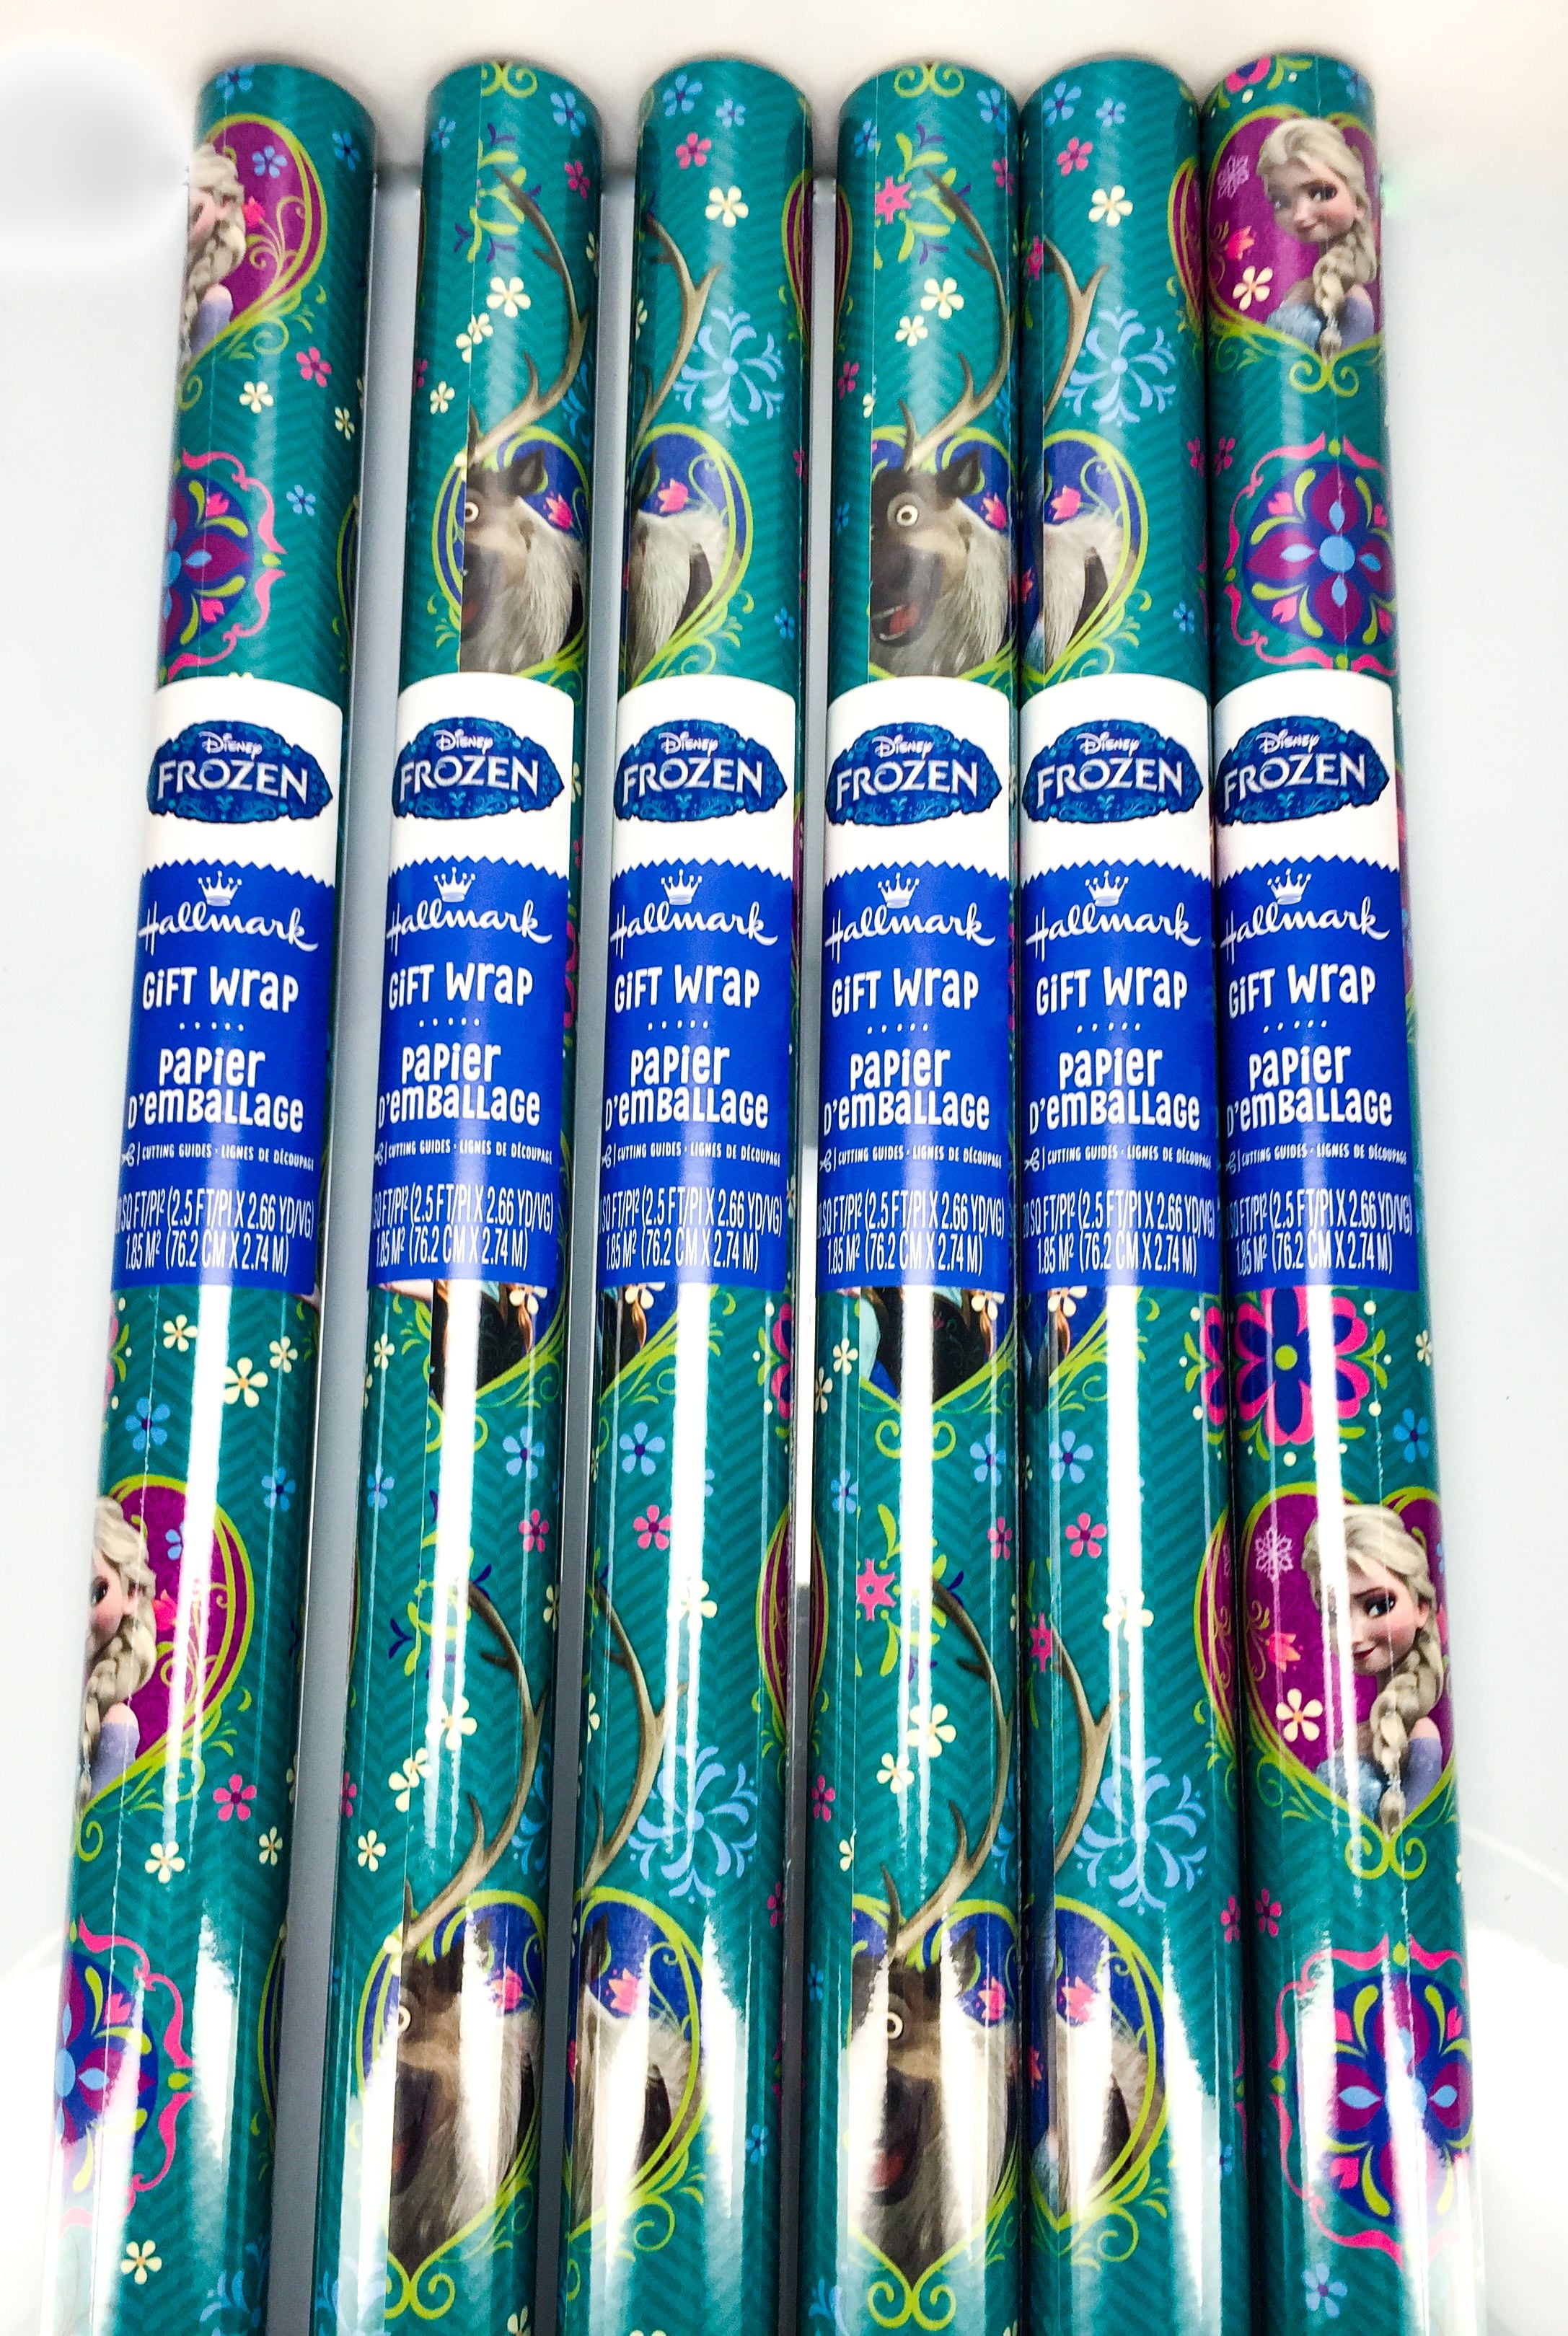 FT Olaf Elsa Disney Red Frozen GIFT WRAP WRAPPING PAPER ROLL CHRISTMAS 60 SQ 